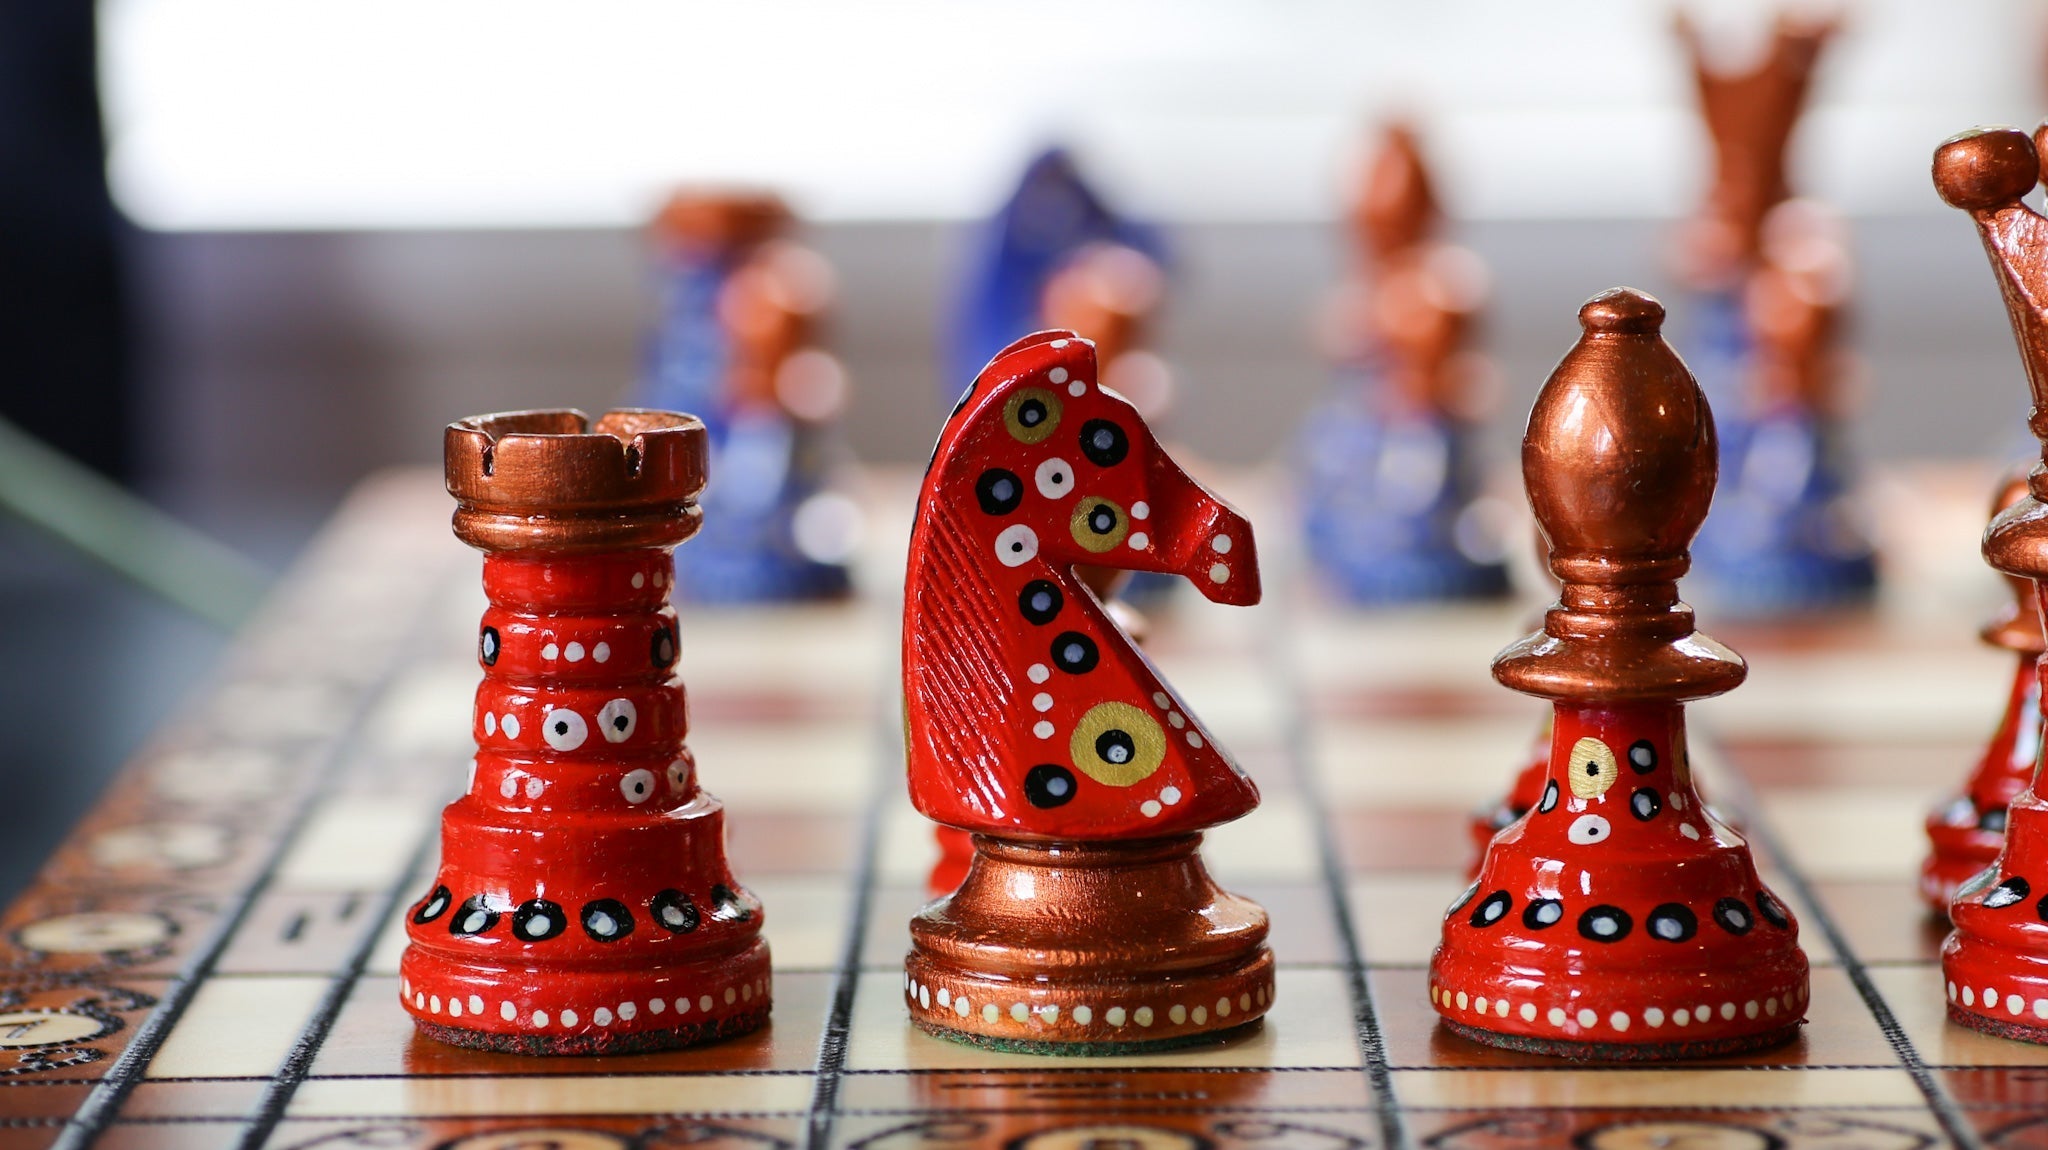 The Soothsayer's Song - Sydney Gruber Painted 21" Ambassador Chess Set #13 - Chess Set - Chess-House